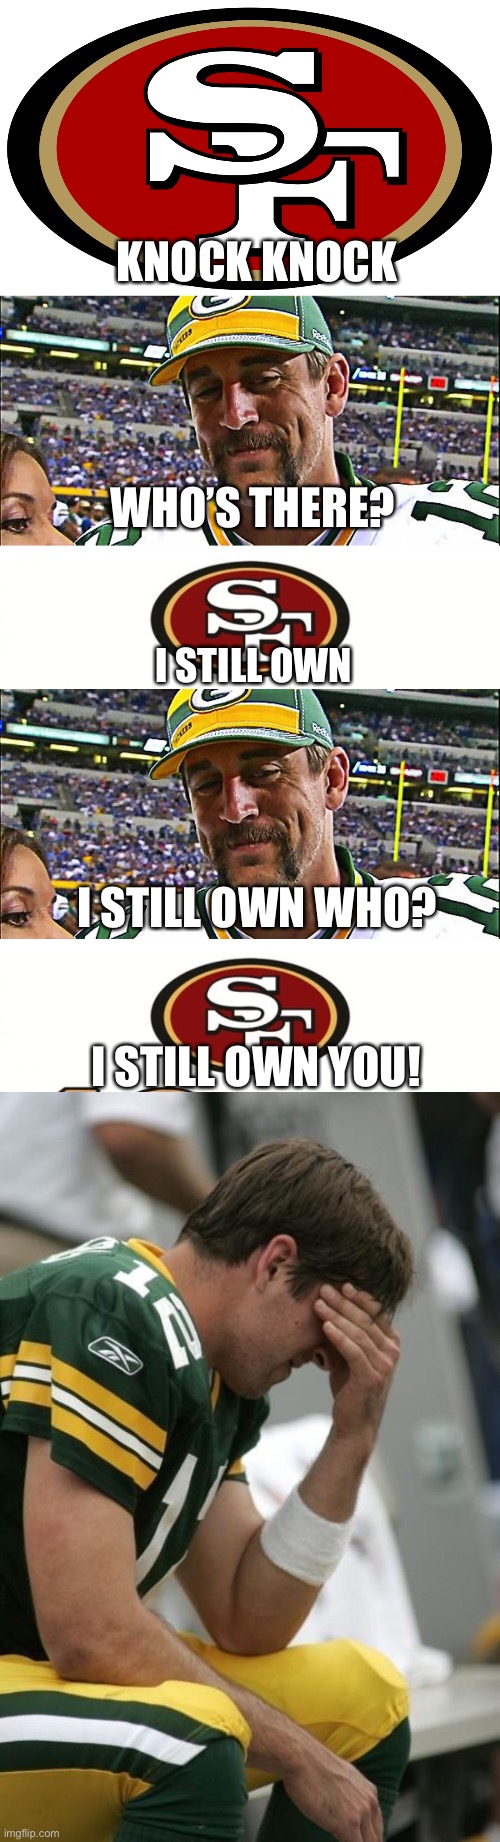 Who got owned? |  KNOCK KNOCK; WHO’S THERE? I STILL OWN; I STILL OWN WHO? I STILL OWN YOU! | image tagged in 49ers,aaron rodgers,chicago bears,memes,nfl memes | made w/ Imgflip meme maker